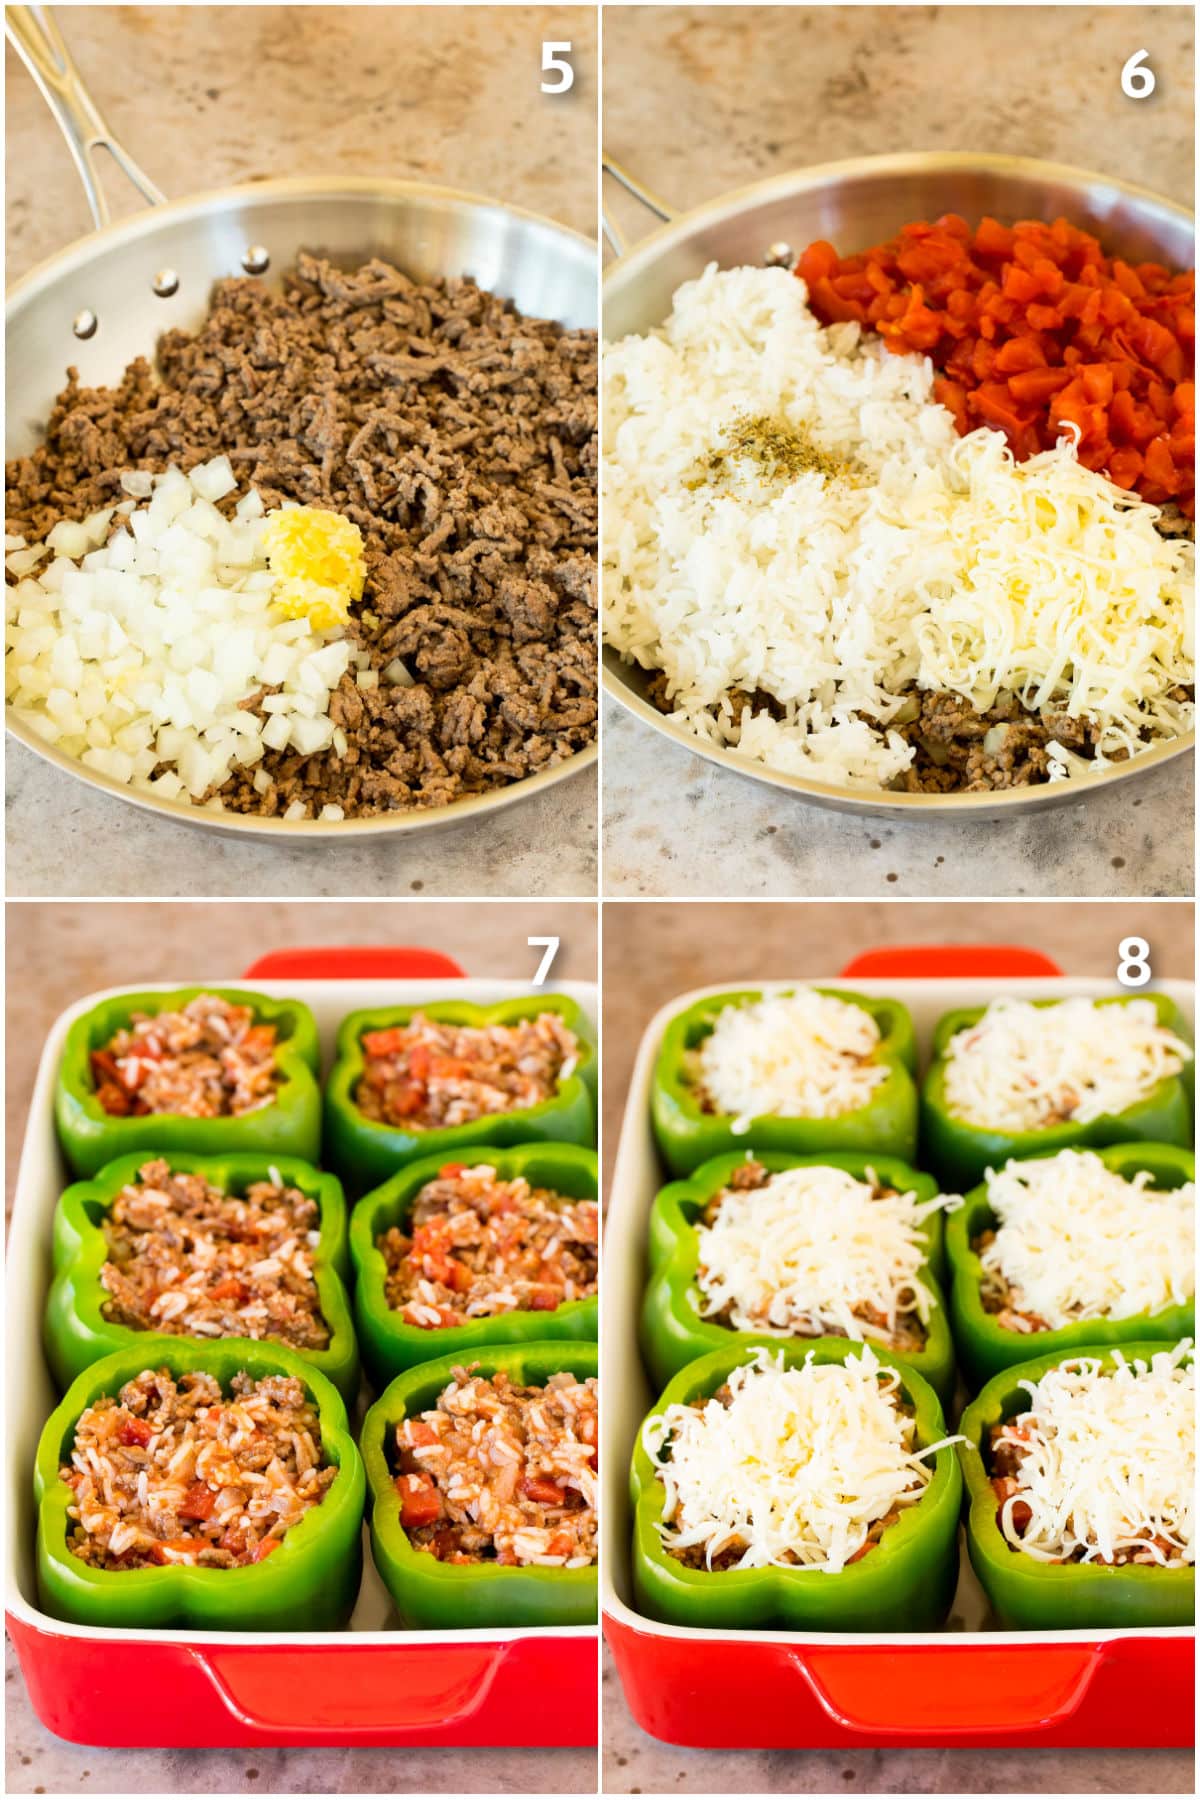 Process shots showing a meat and rice mixture being cooked and stuffed into peppers.